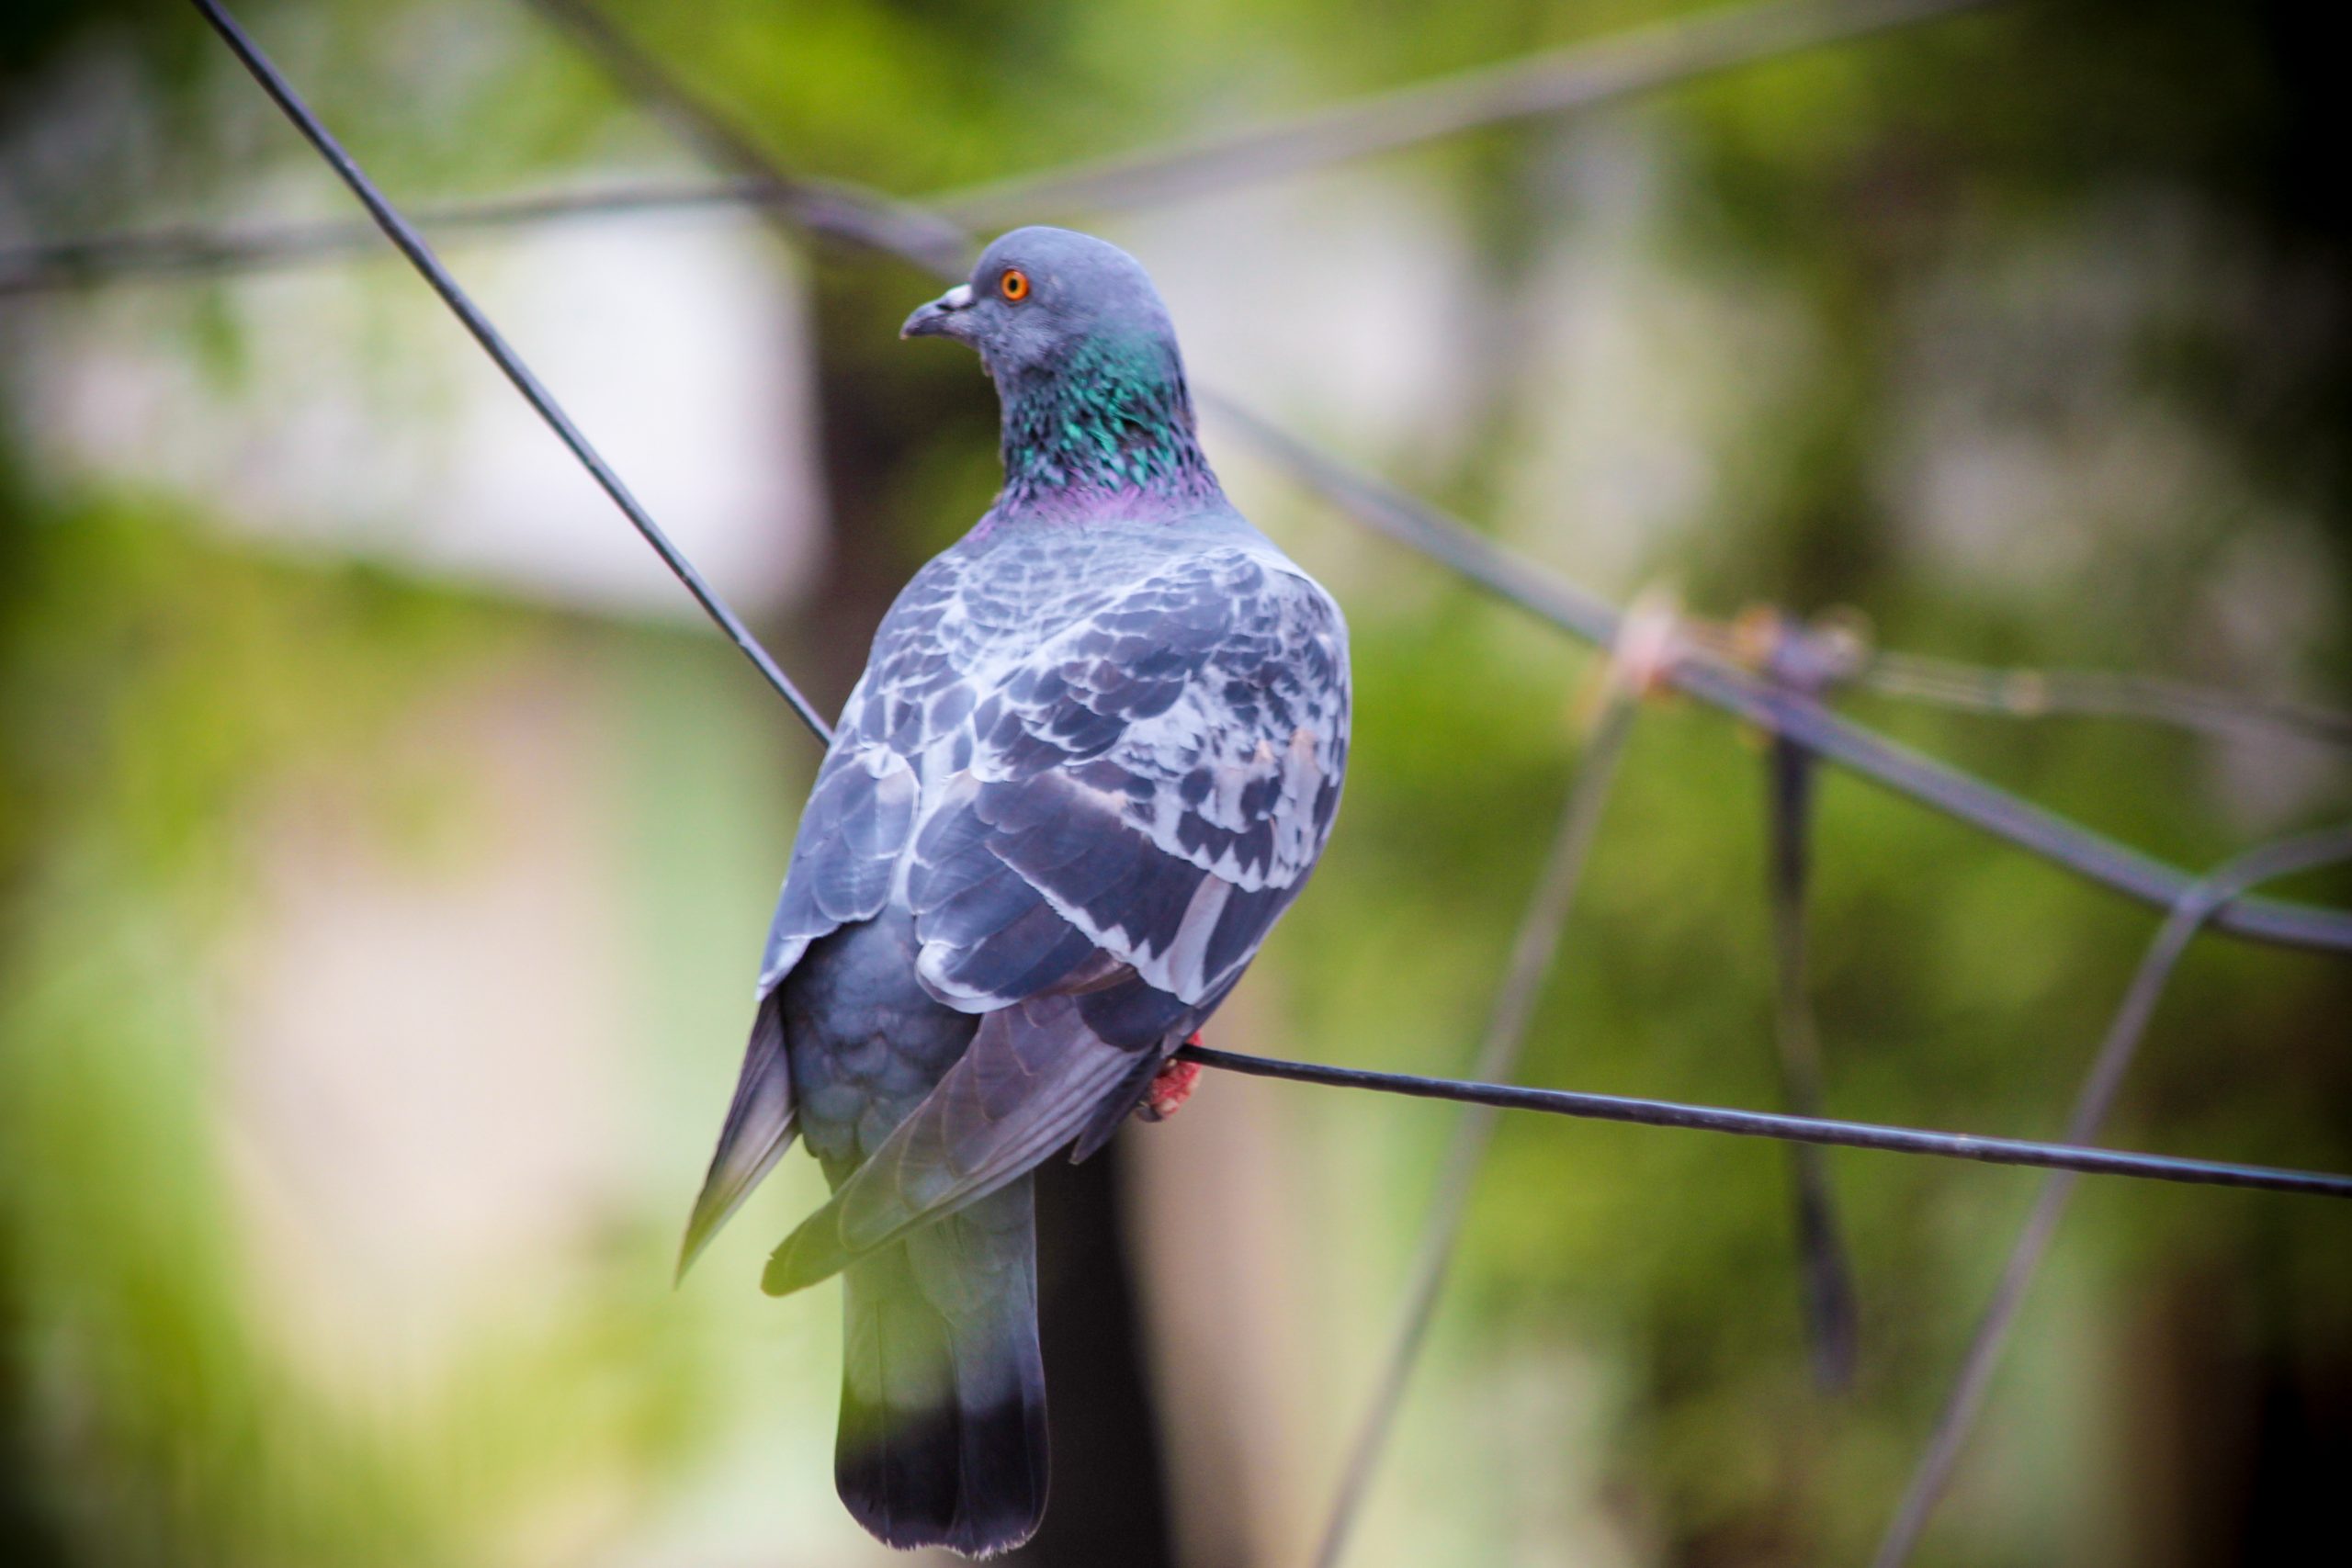 A pigeon on a wire